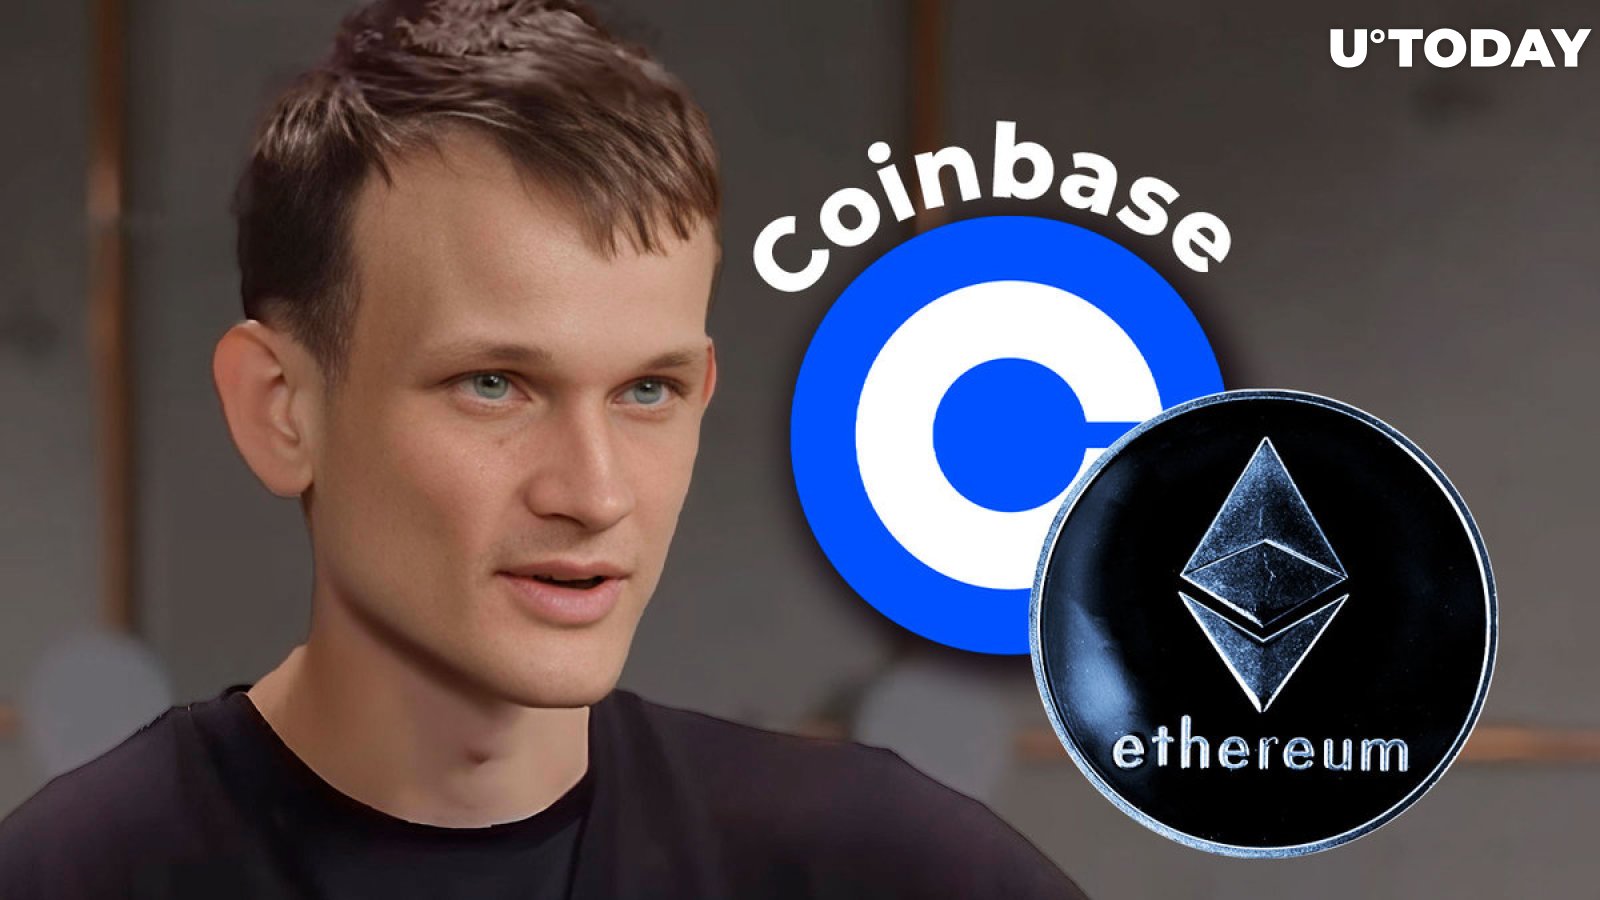 Ethereum Founder Vitalik Buterin Transfers 600 ETH to Coinbase: Time to Sell?